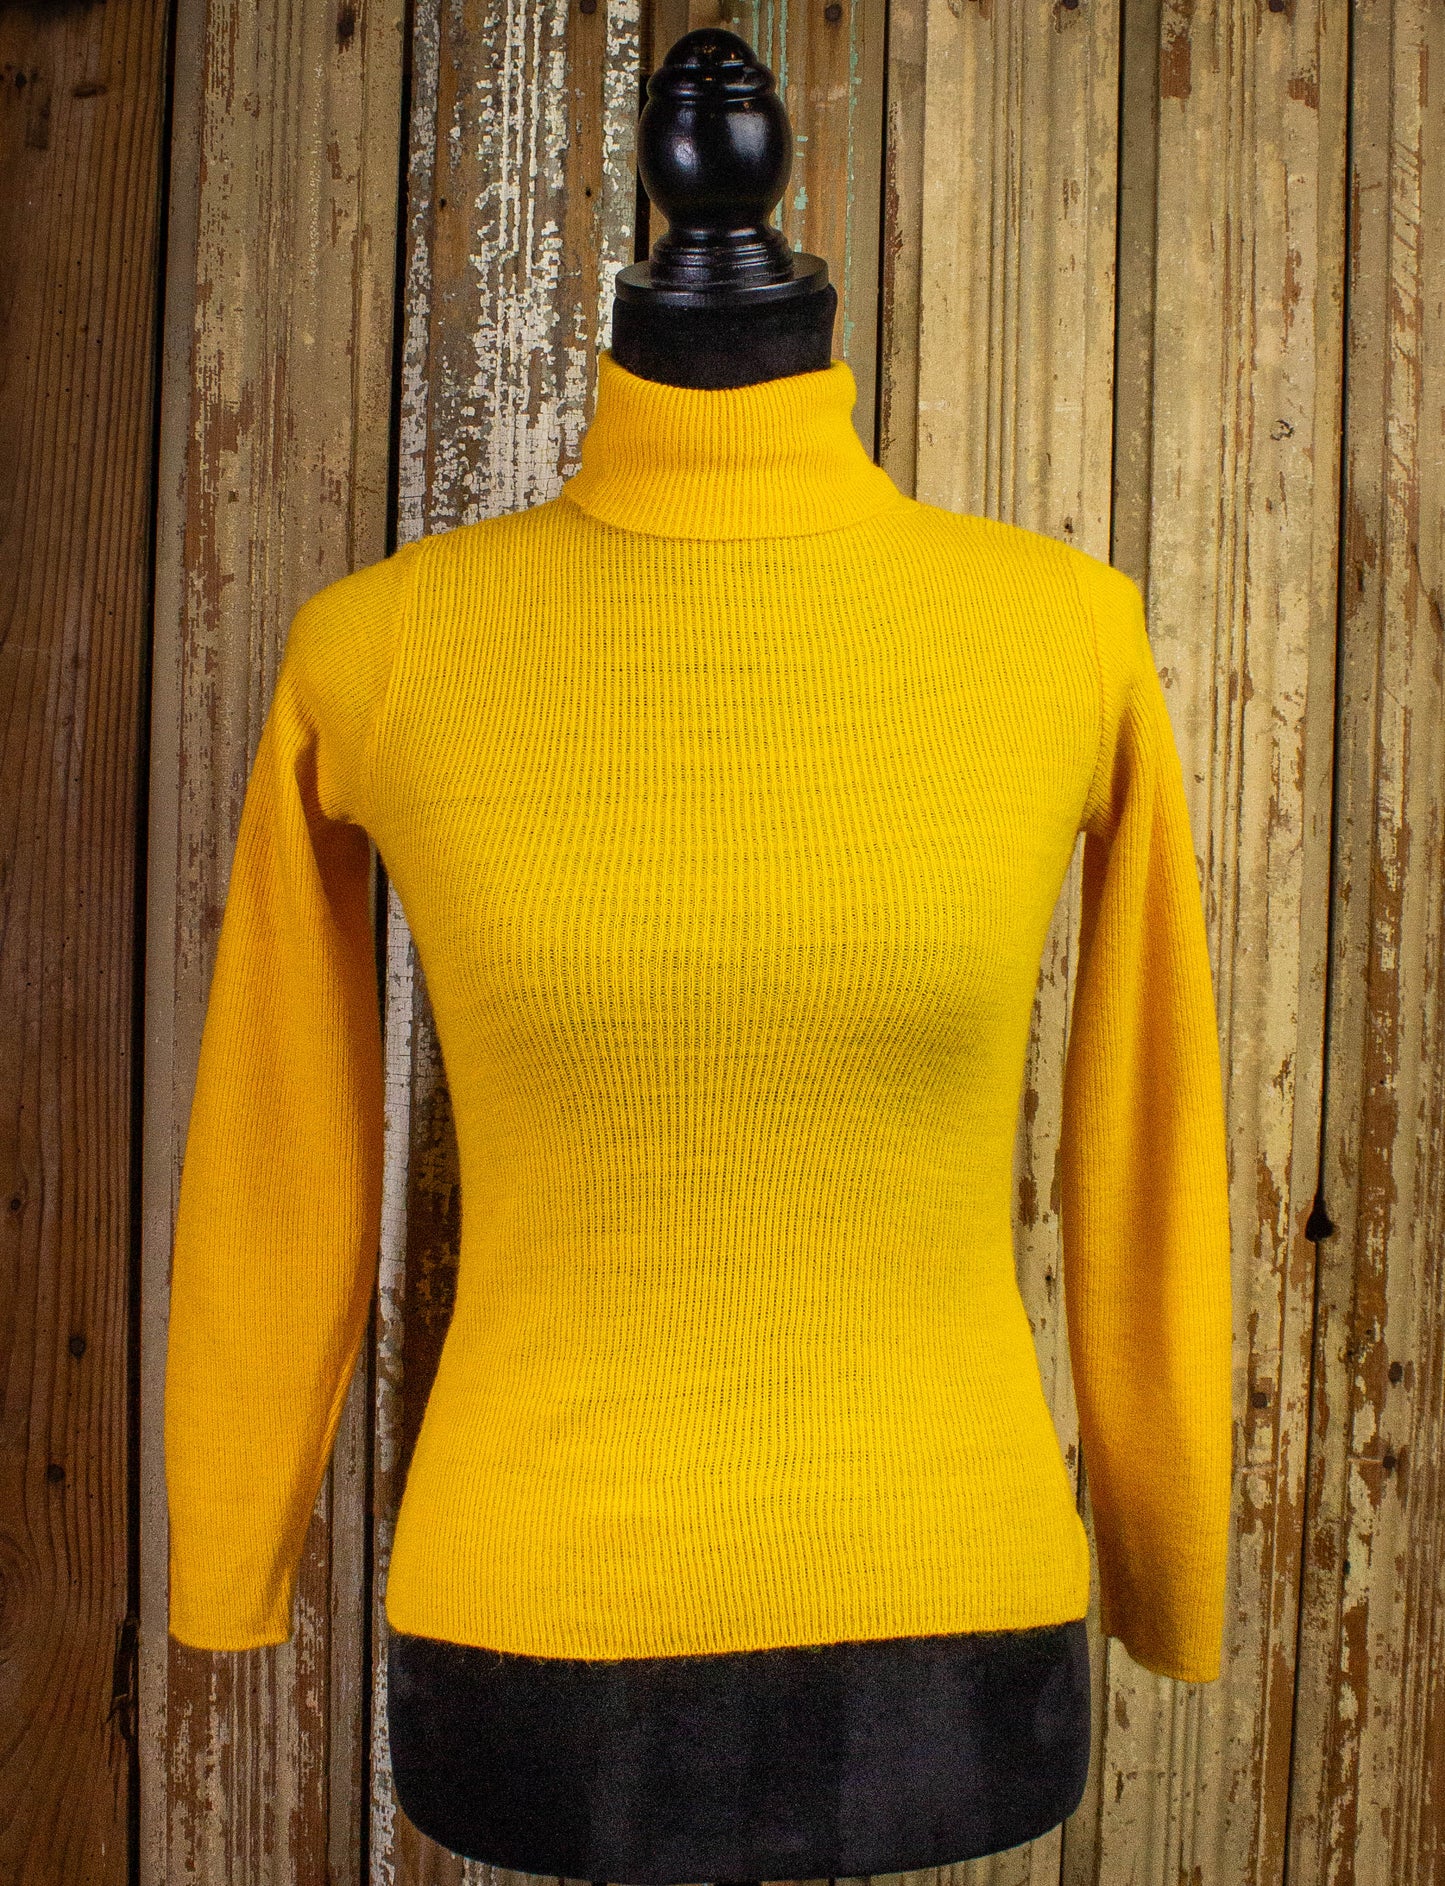 Vintage Northern Reflection Women's Sweater M/L Yellow Cottage Core 2870